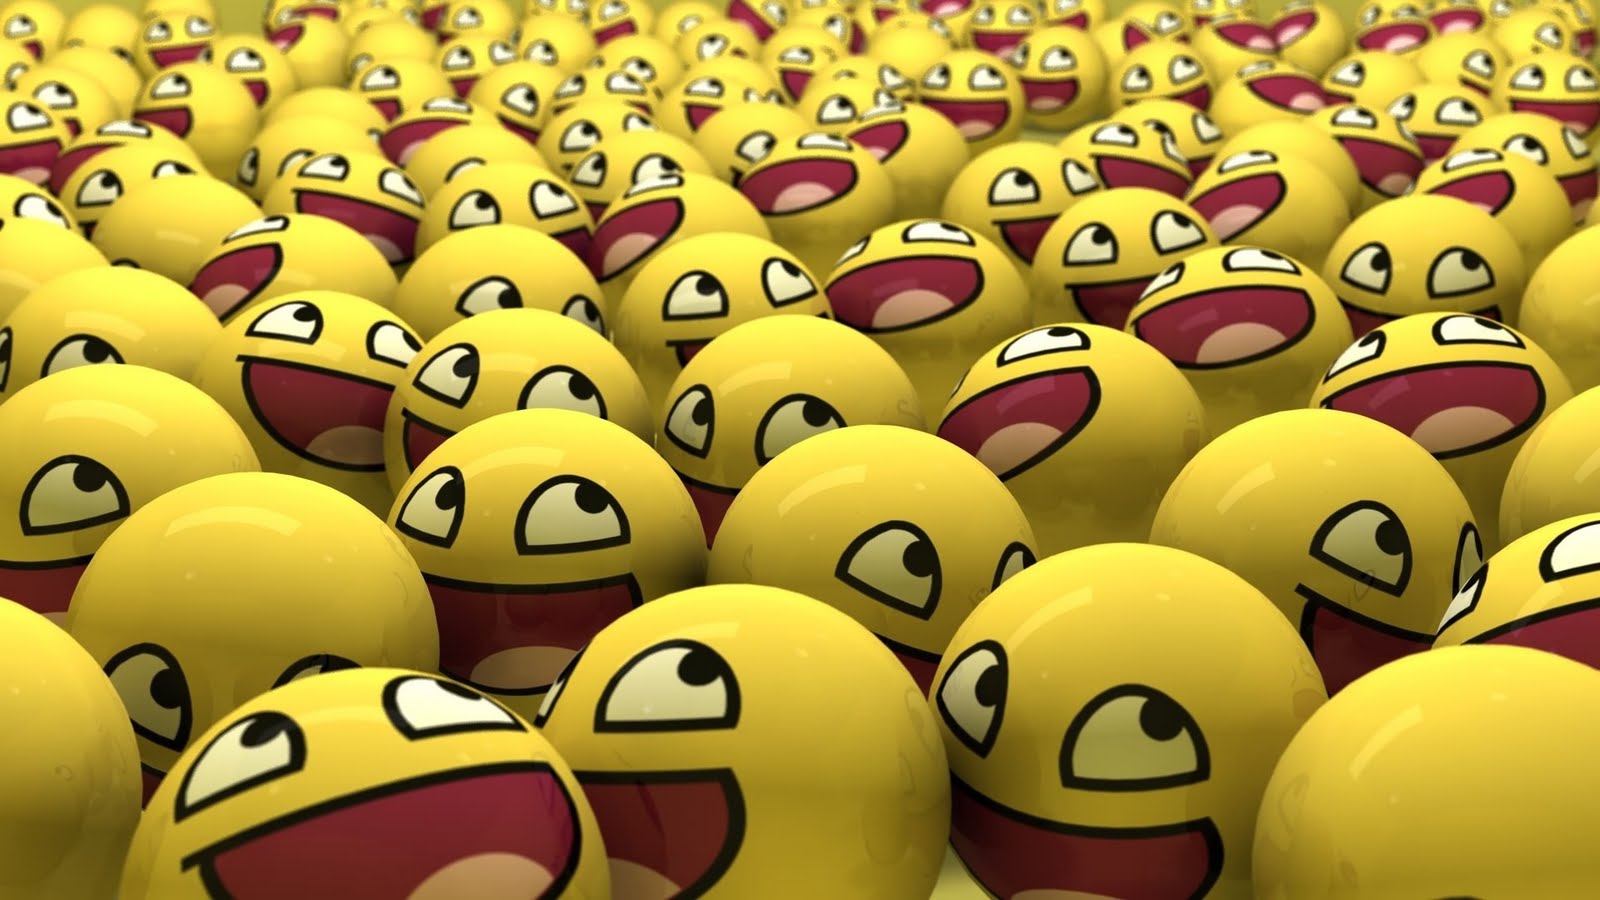 Wallpapers Smiley Face HD Wallpaper 1600x900